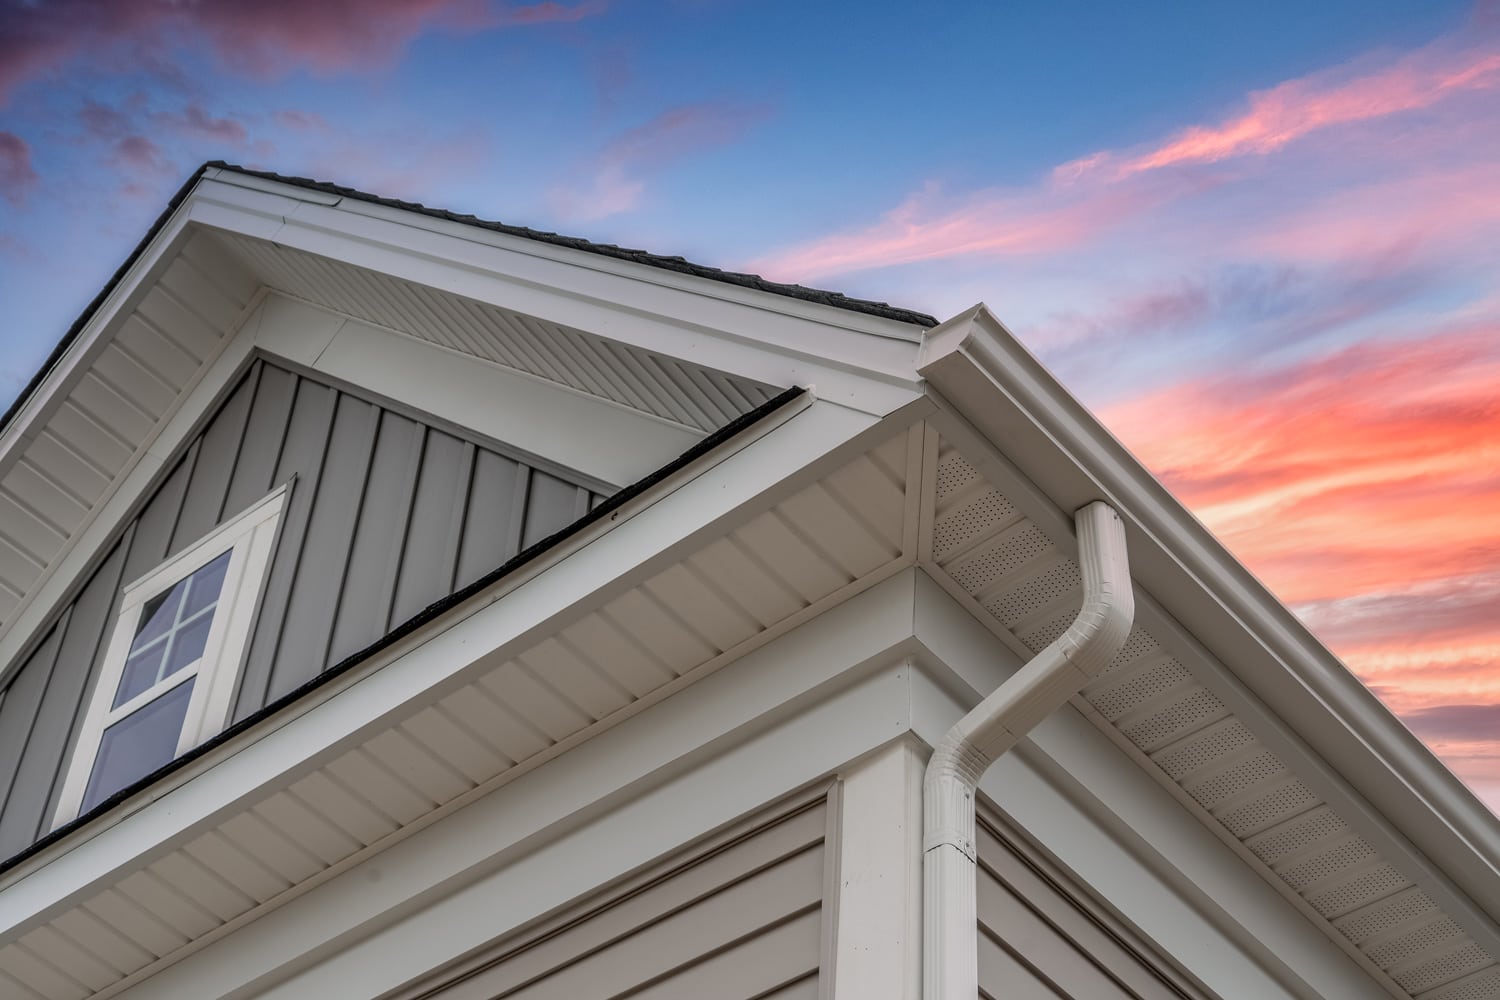 White frame gutter guard system, with gray horizontal and vertical vinyl siding fascia, drip edge, soffit, on a pitched roof attic 